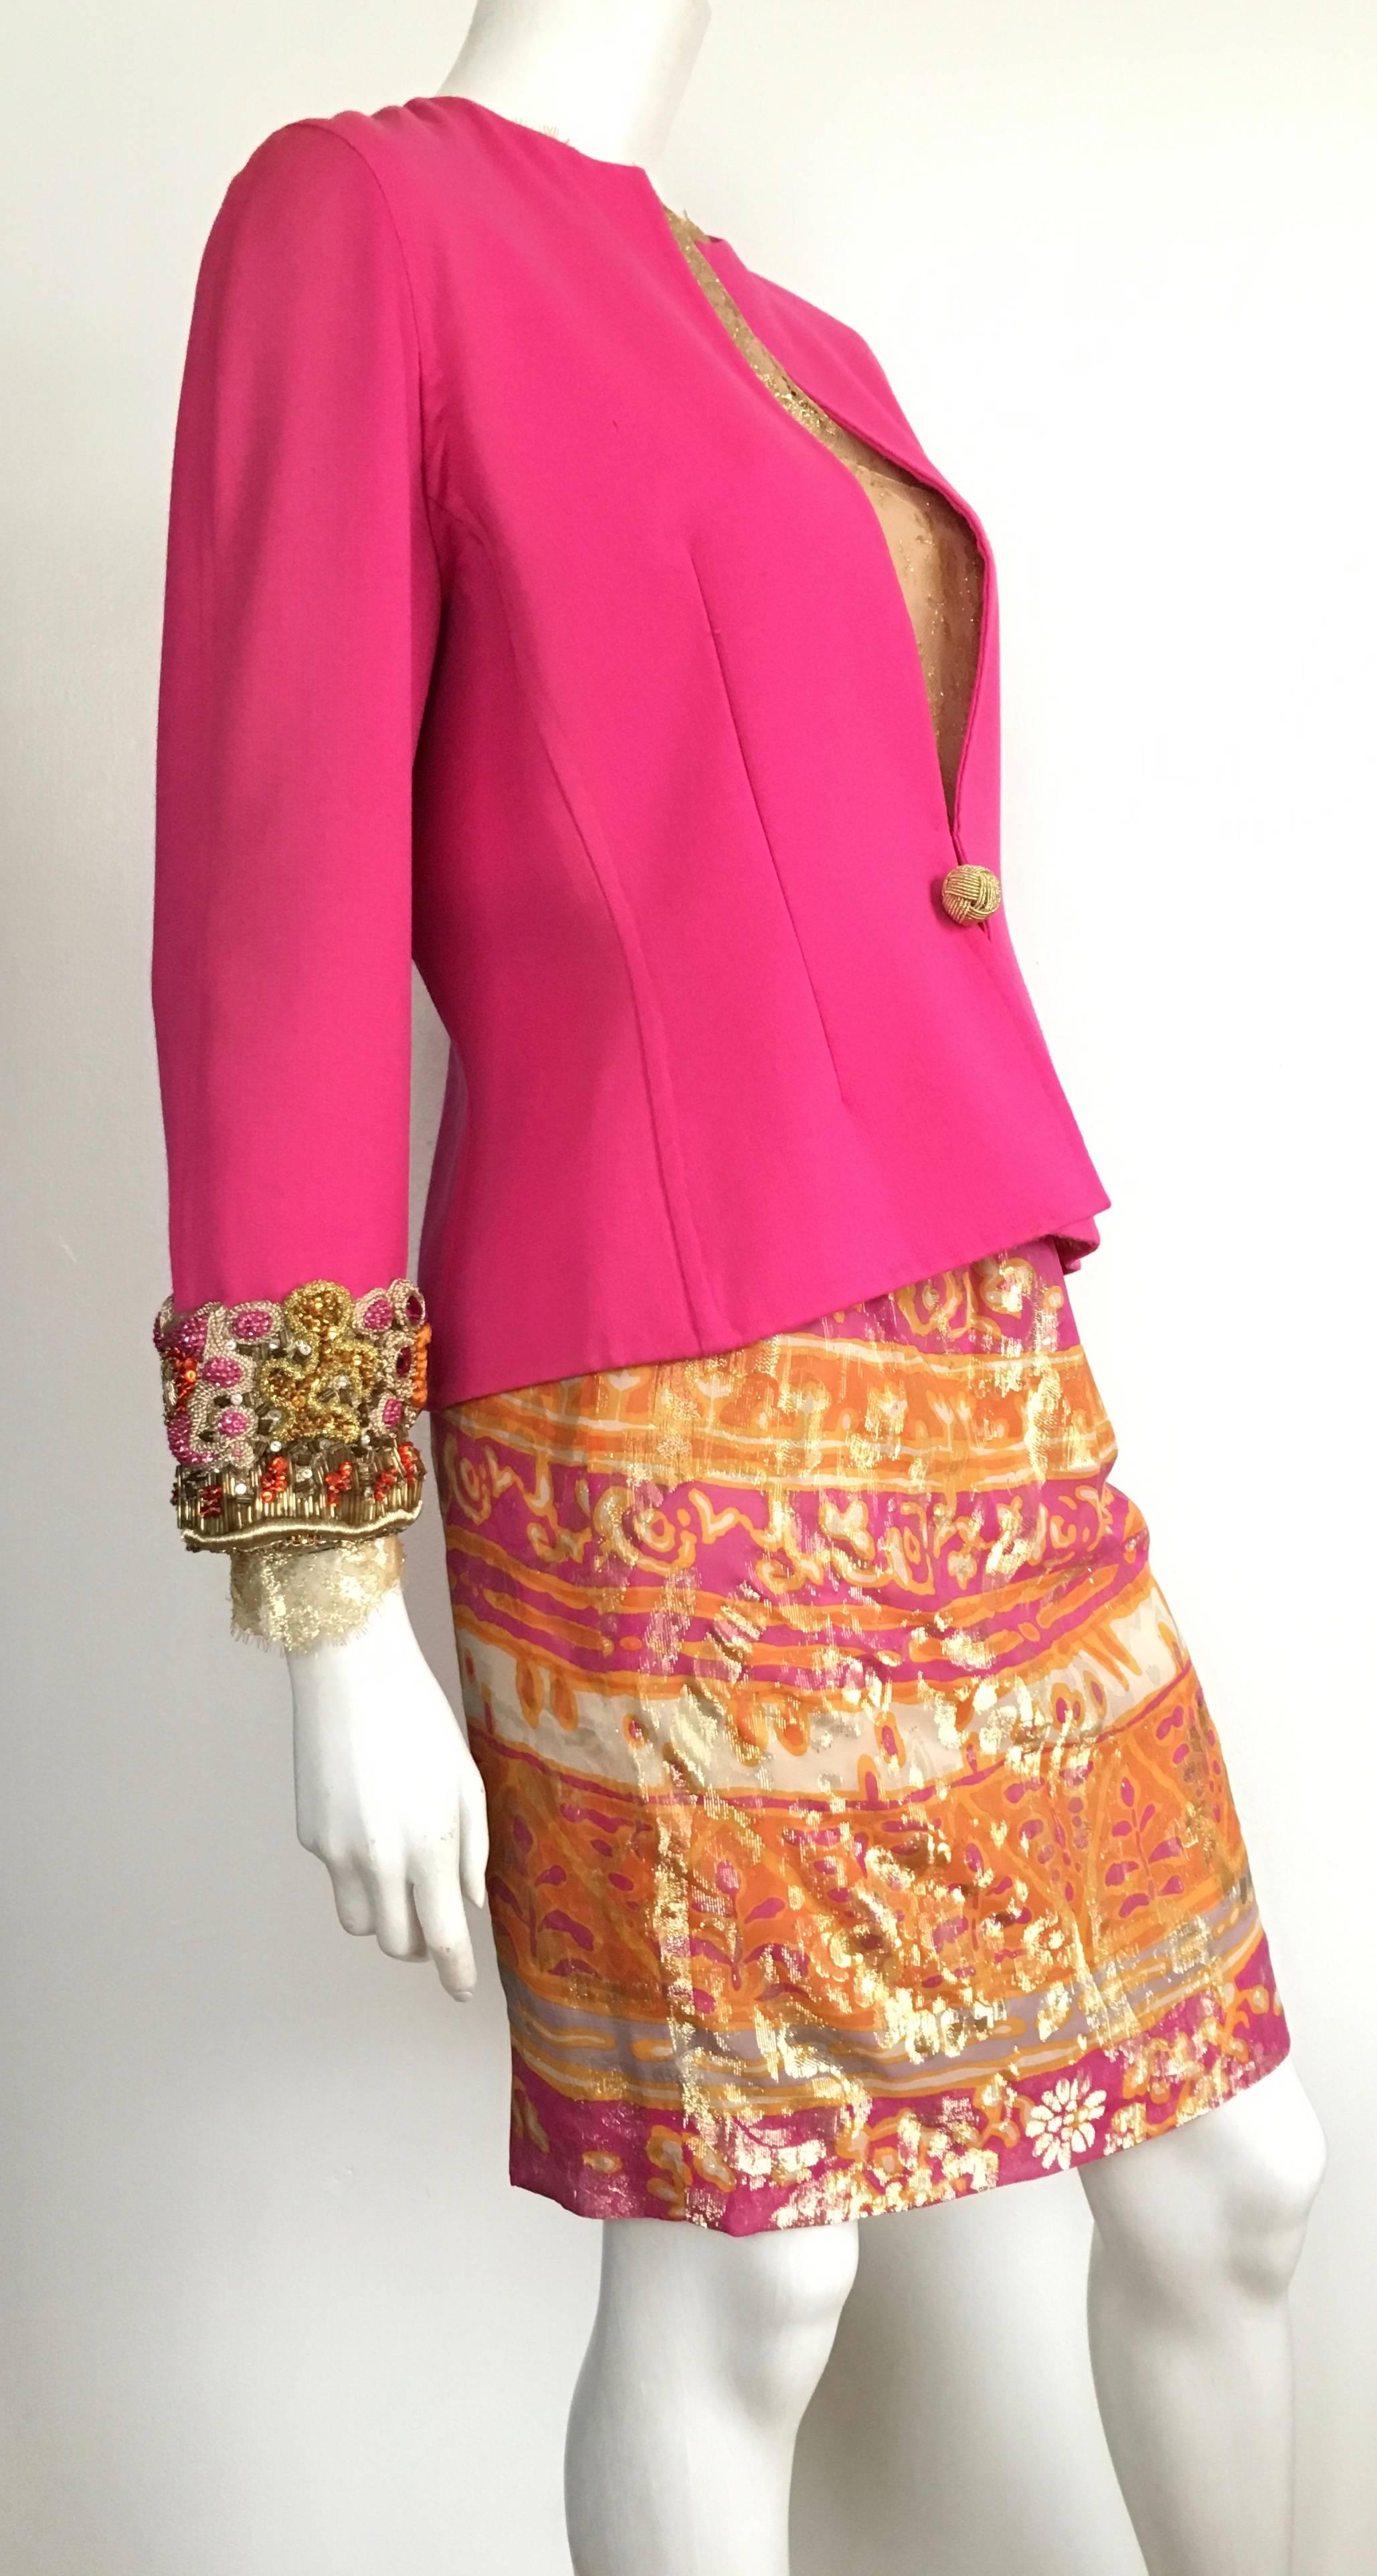 Bill Blass for Saks Fifth Avenue 1980s fuchsia beaded encrusted jacket with gold lace blouse & skirt is labeled a size 8 but fits more like a modern size 6. The waist on skirt is 26. 1/2